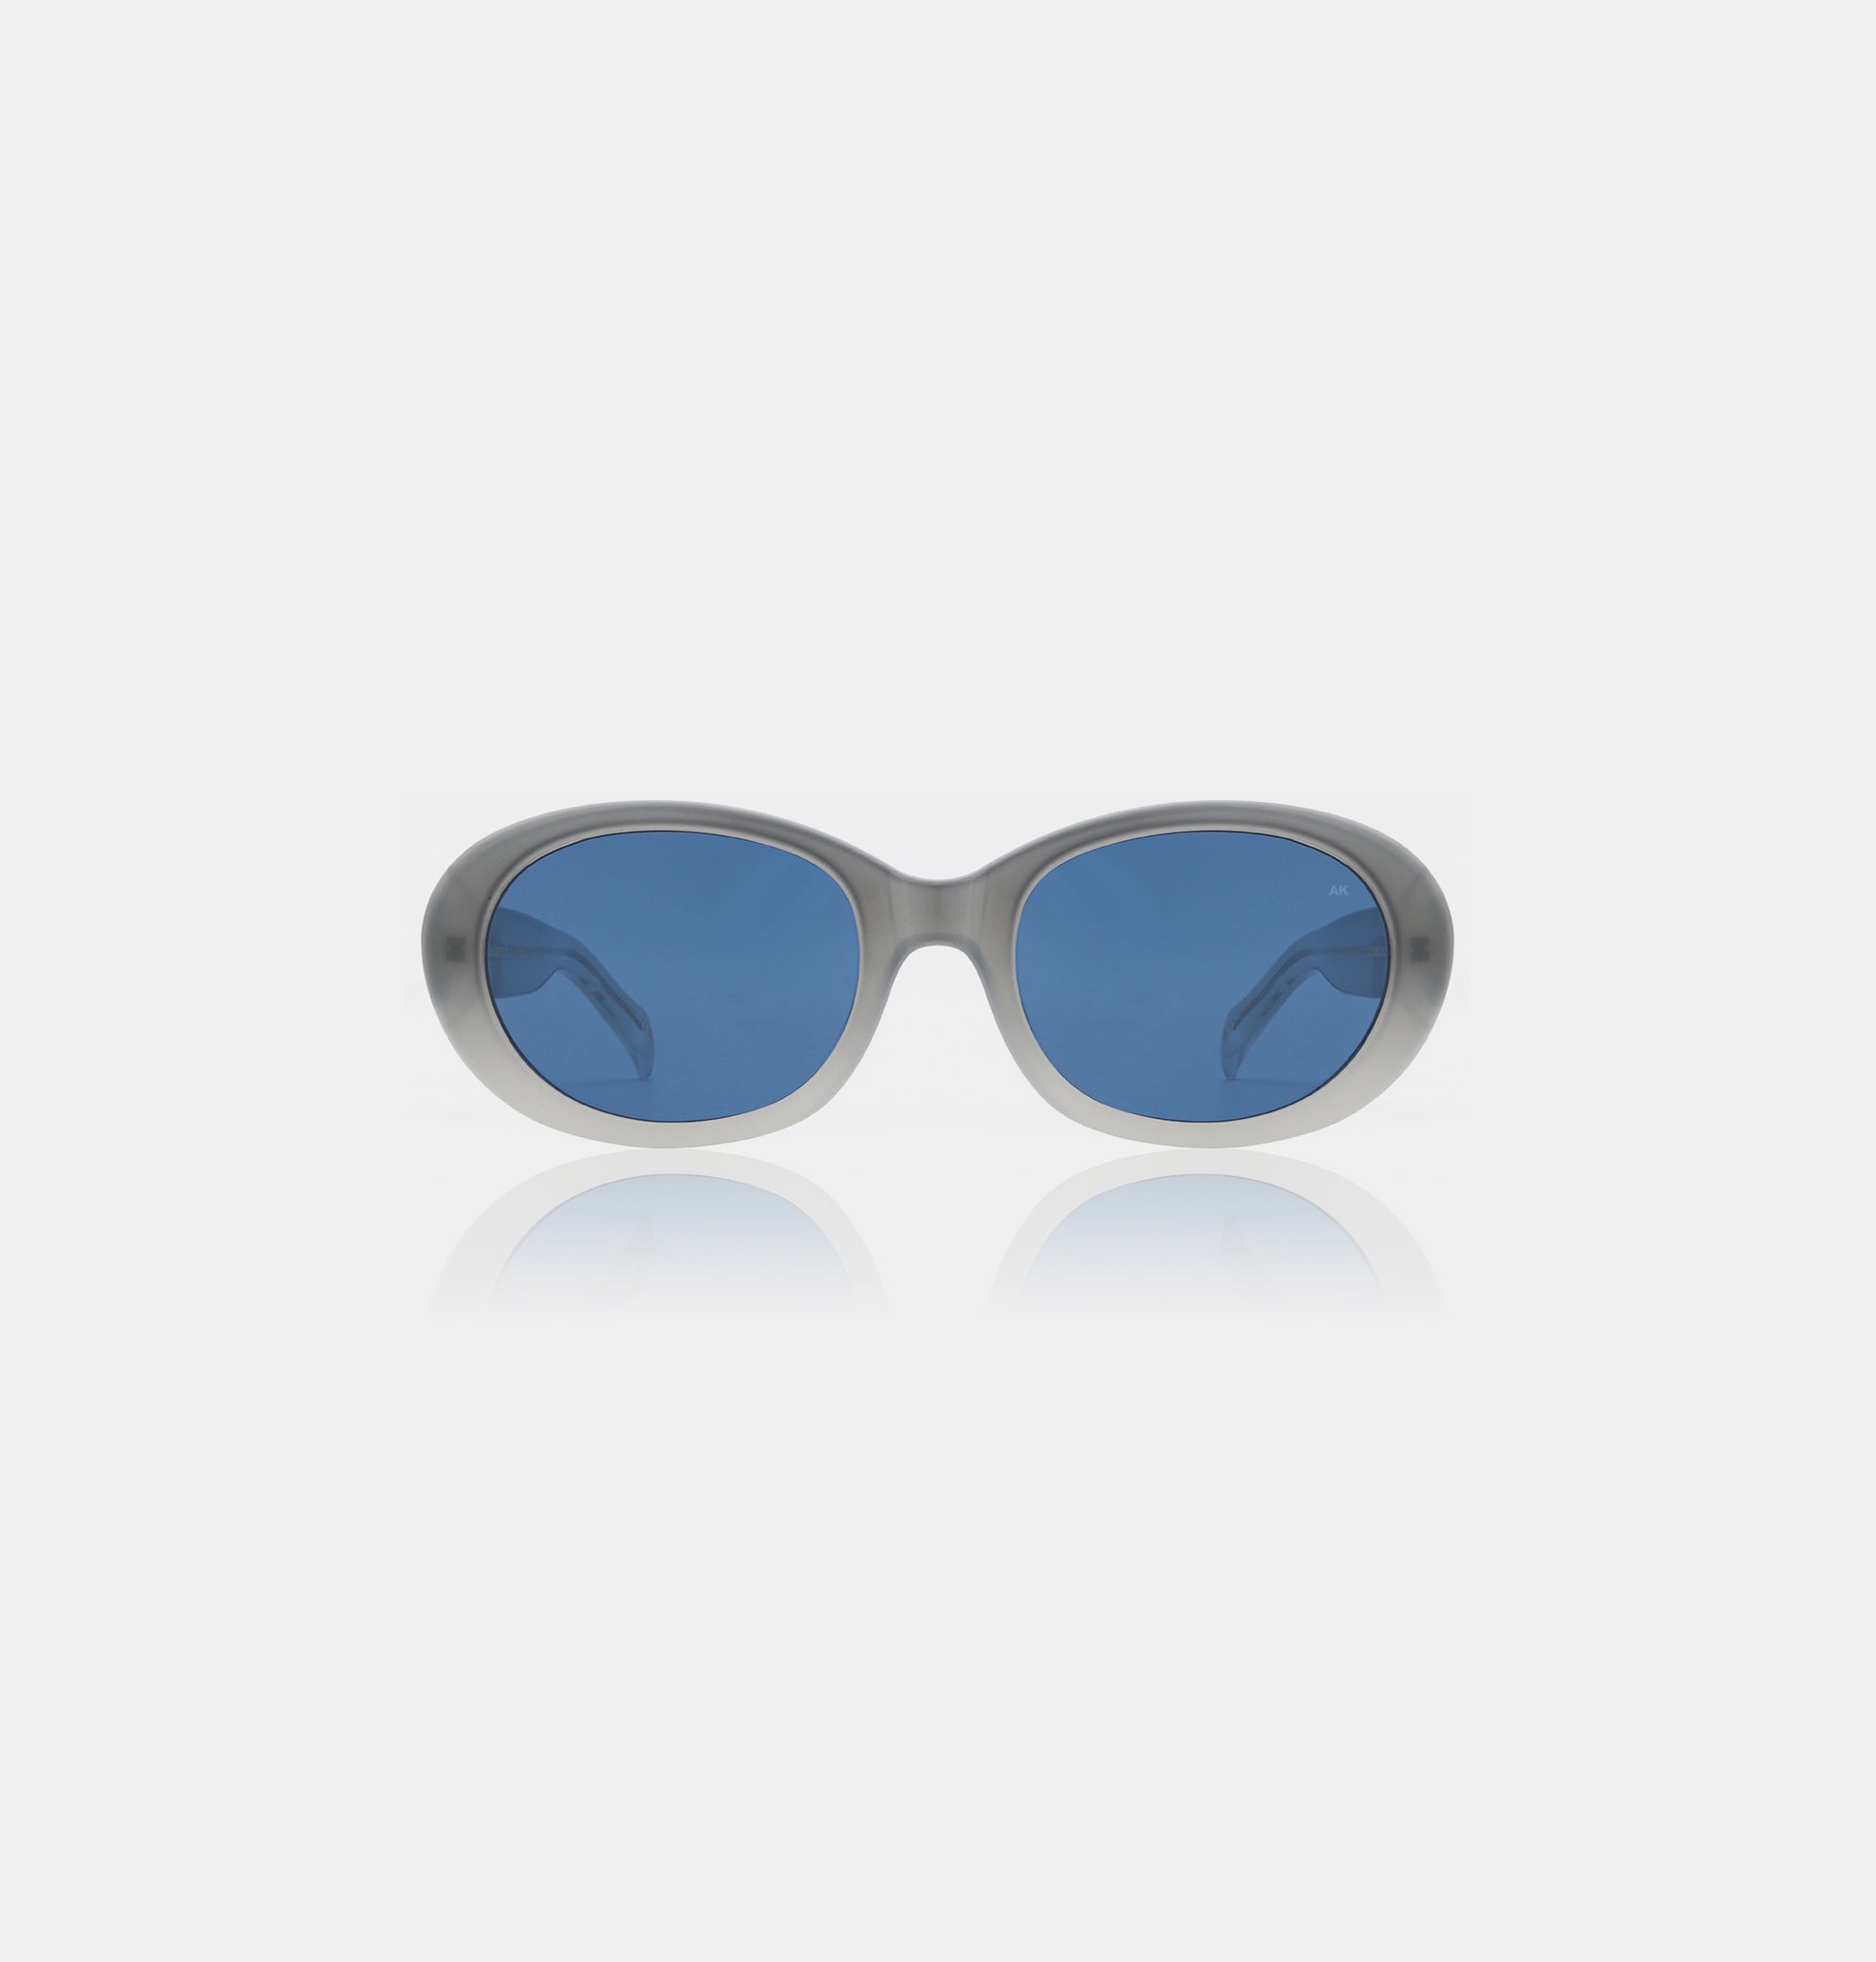 Anma sunglasses in glaucus grey/light grey